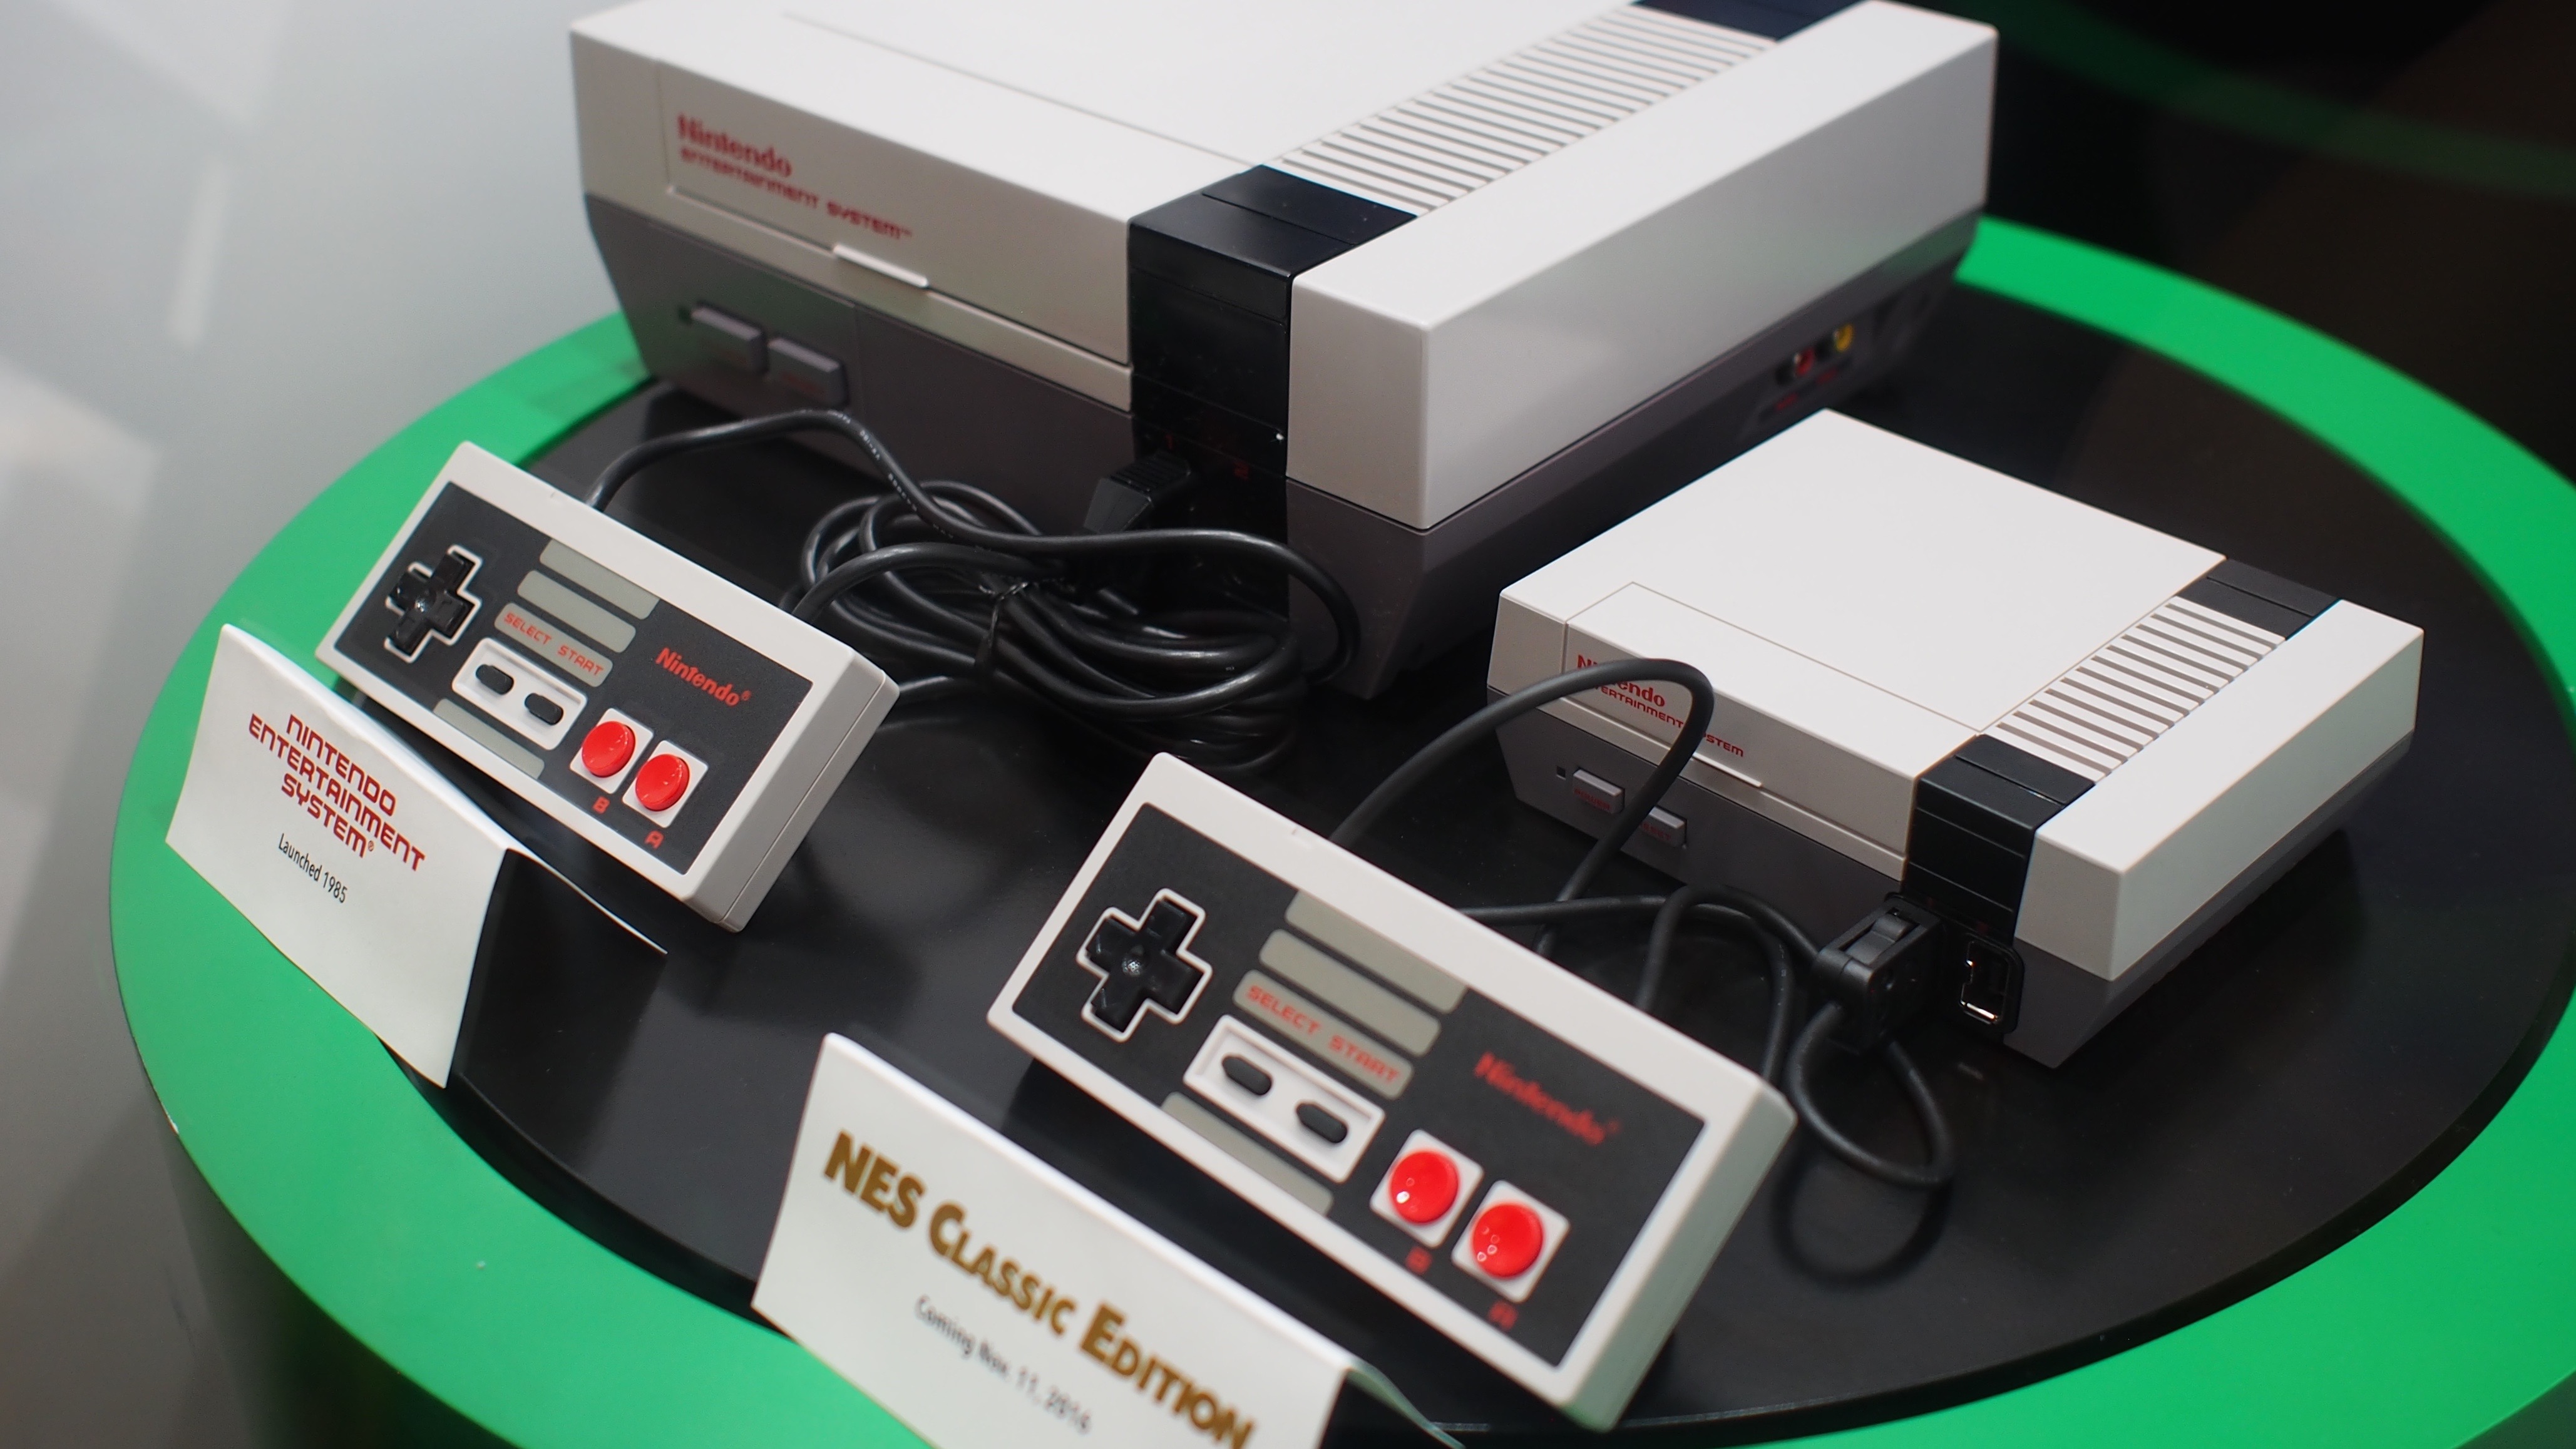 Here's what the mini Nintendo NES Classic Edition looks like in the